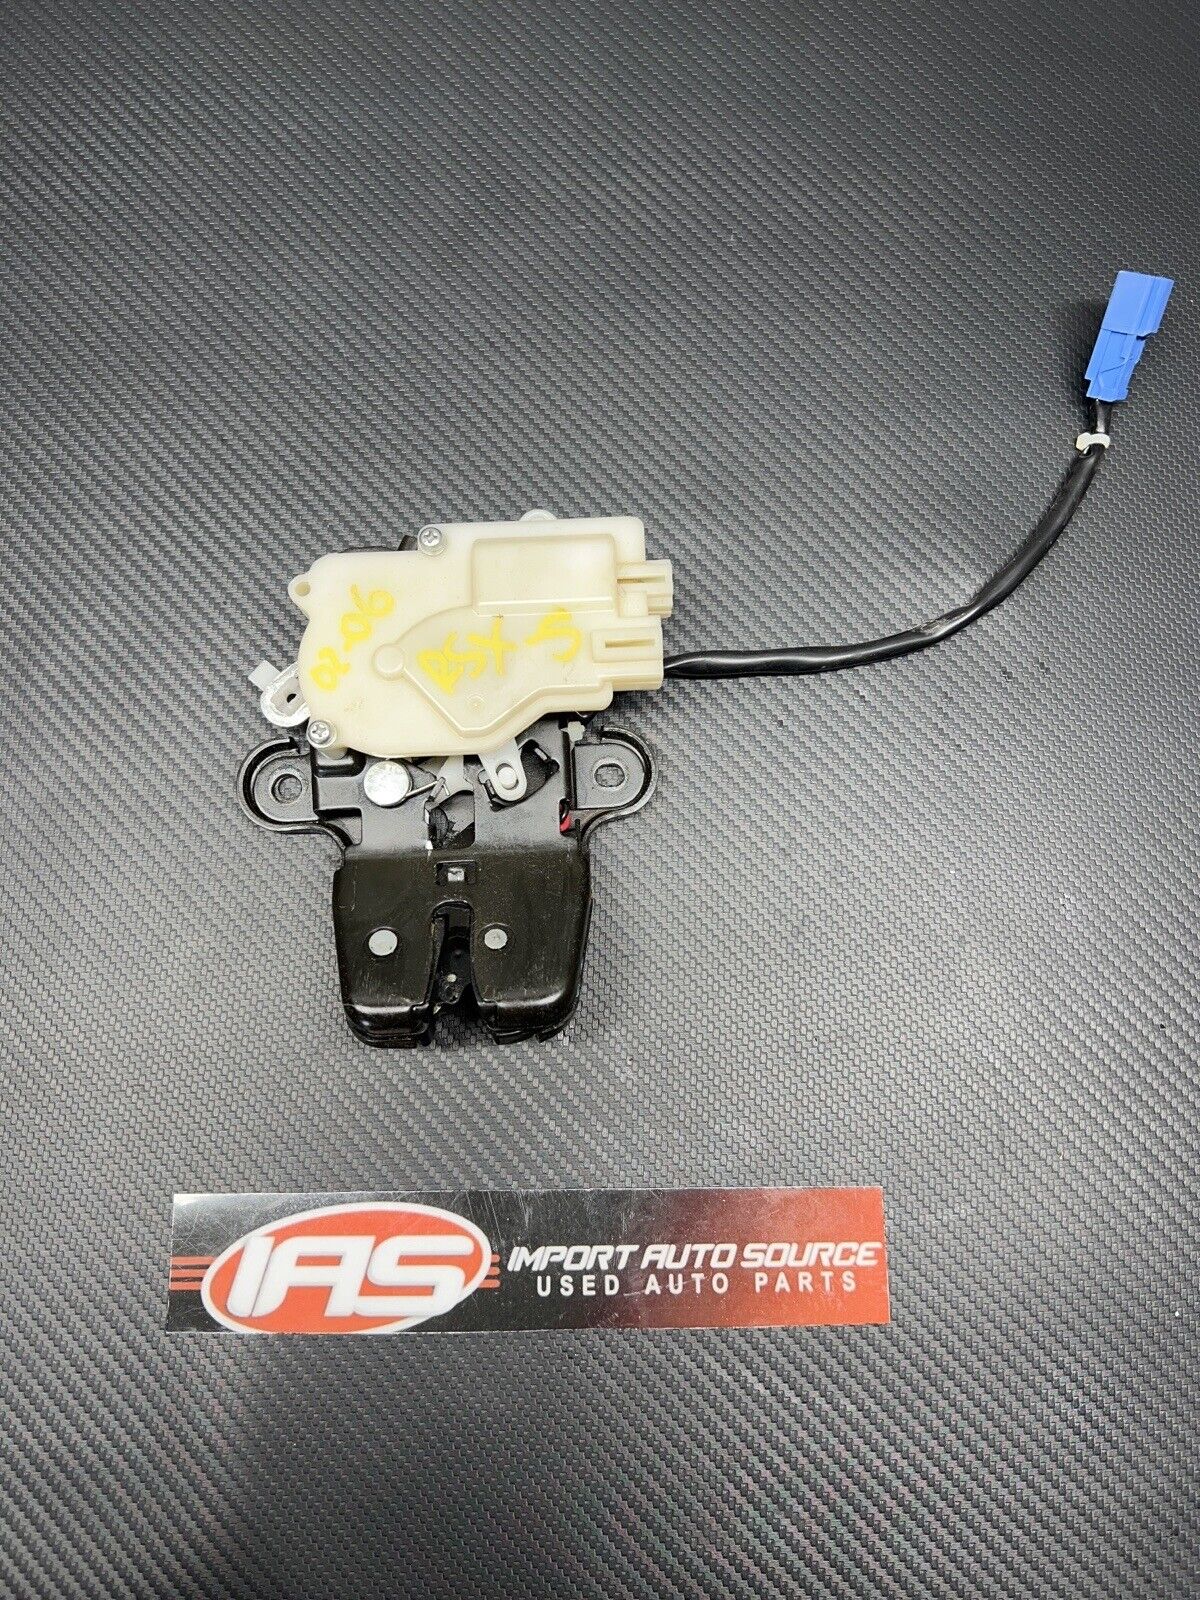 ♻️2002-2006 ACURA RSX TRUNK LATCH POWER LOCK RELEASE ACTUATOR HATCH OEM USED